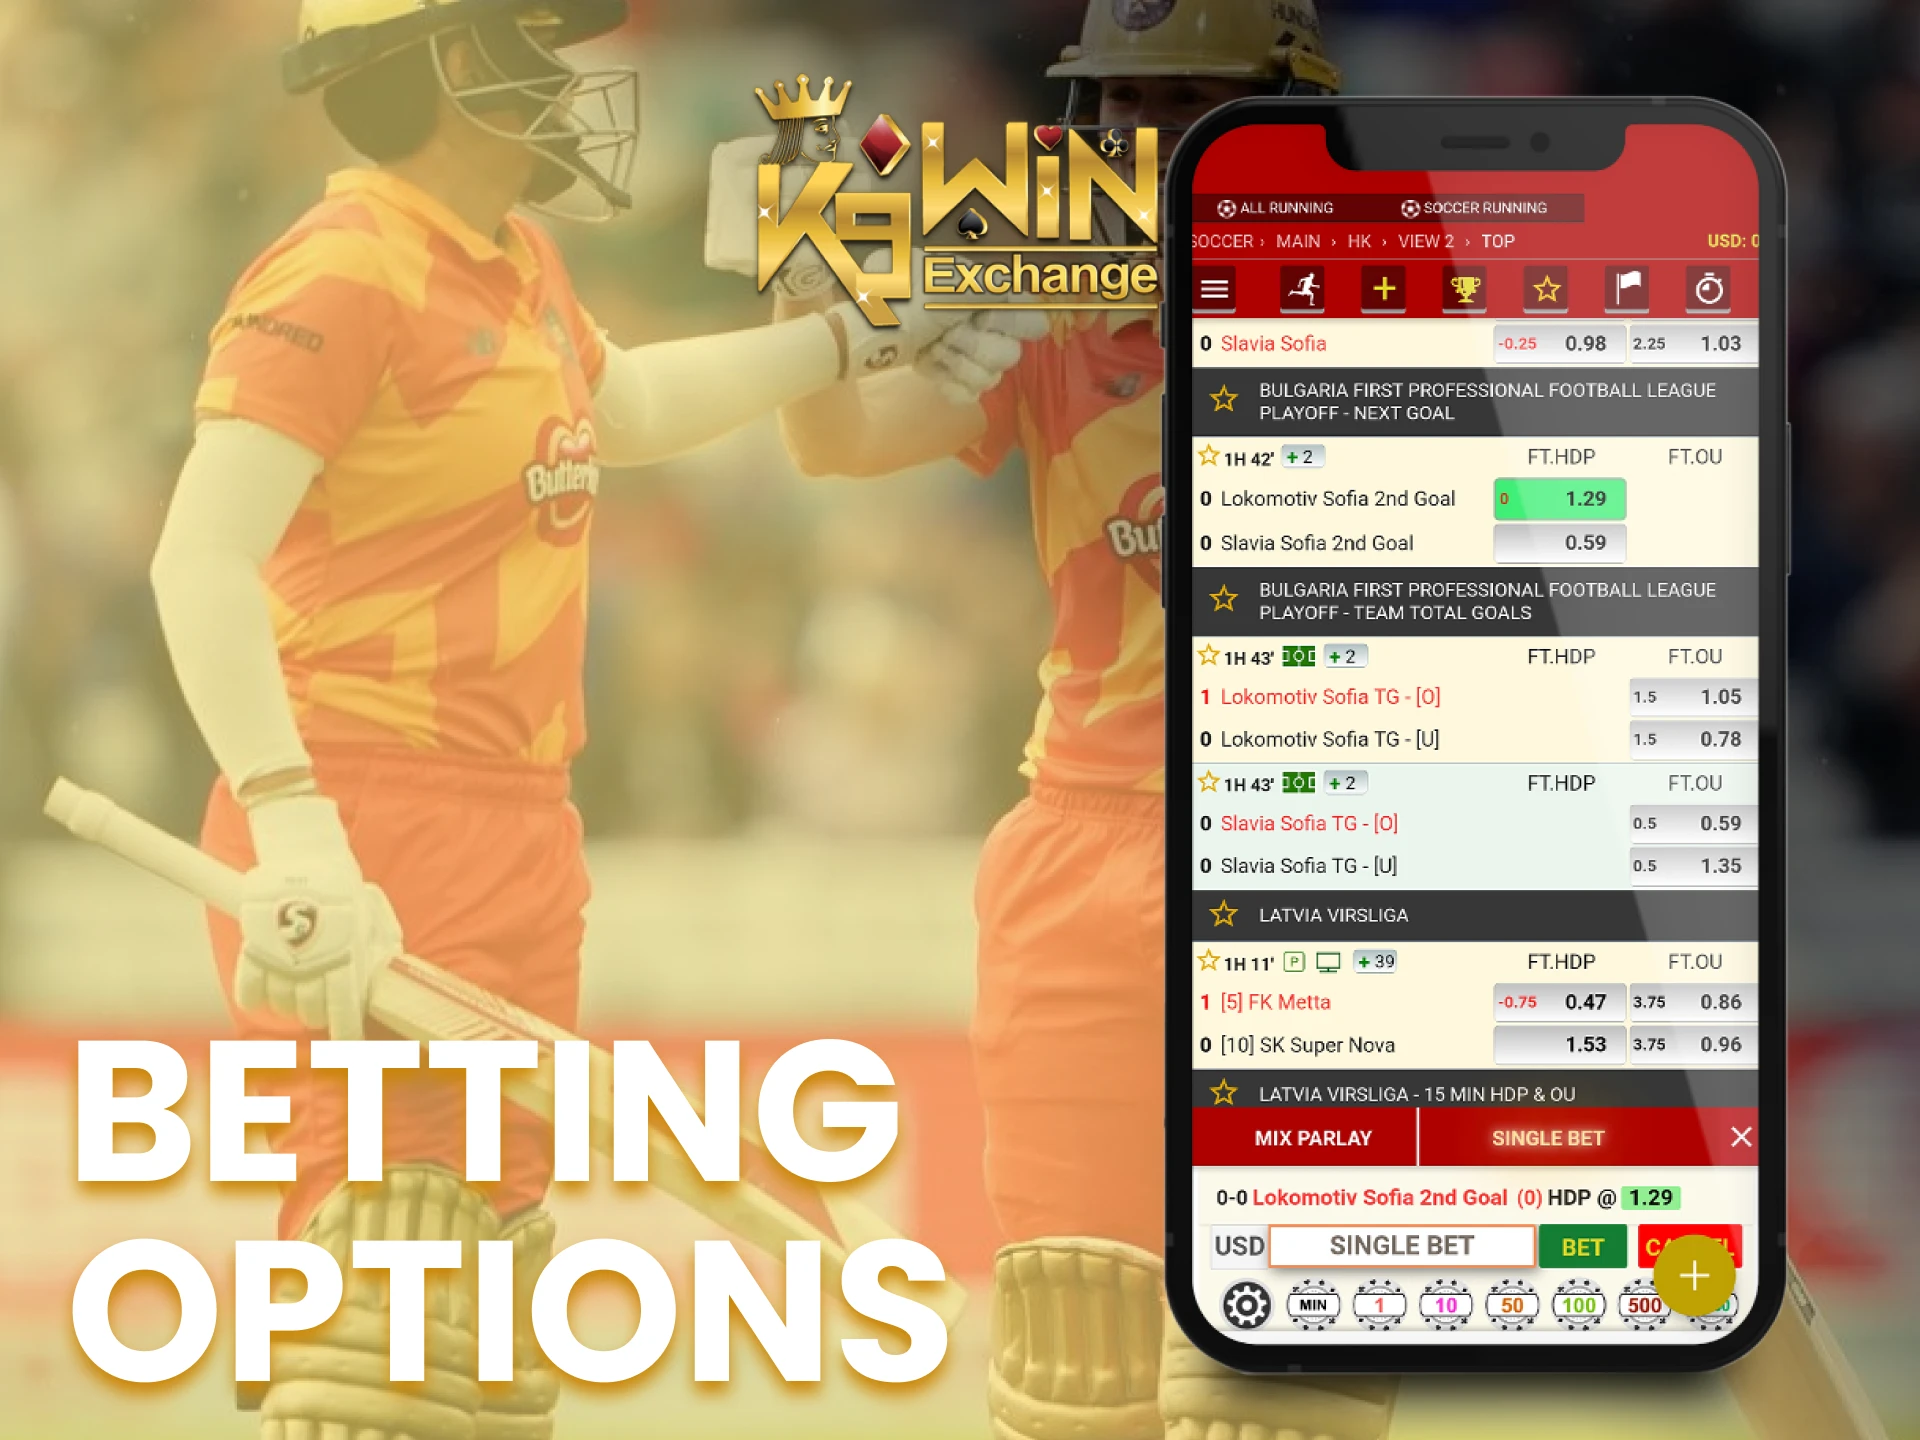 Use different betting options when making new bets in the K9Win app.